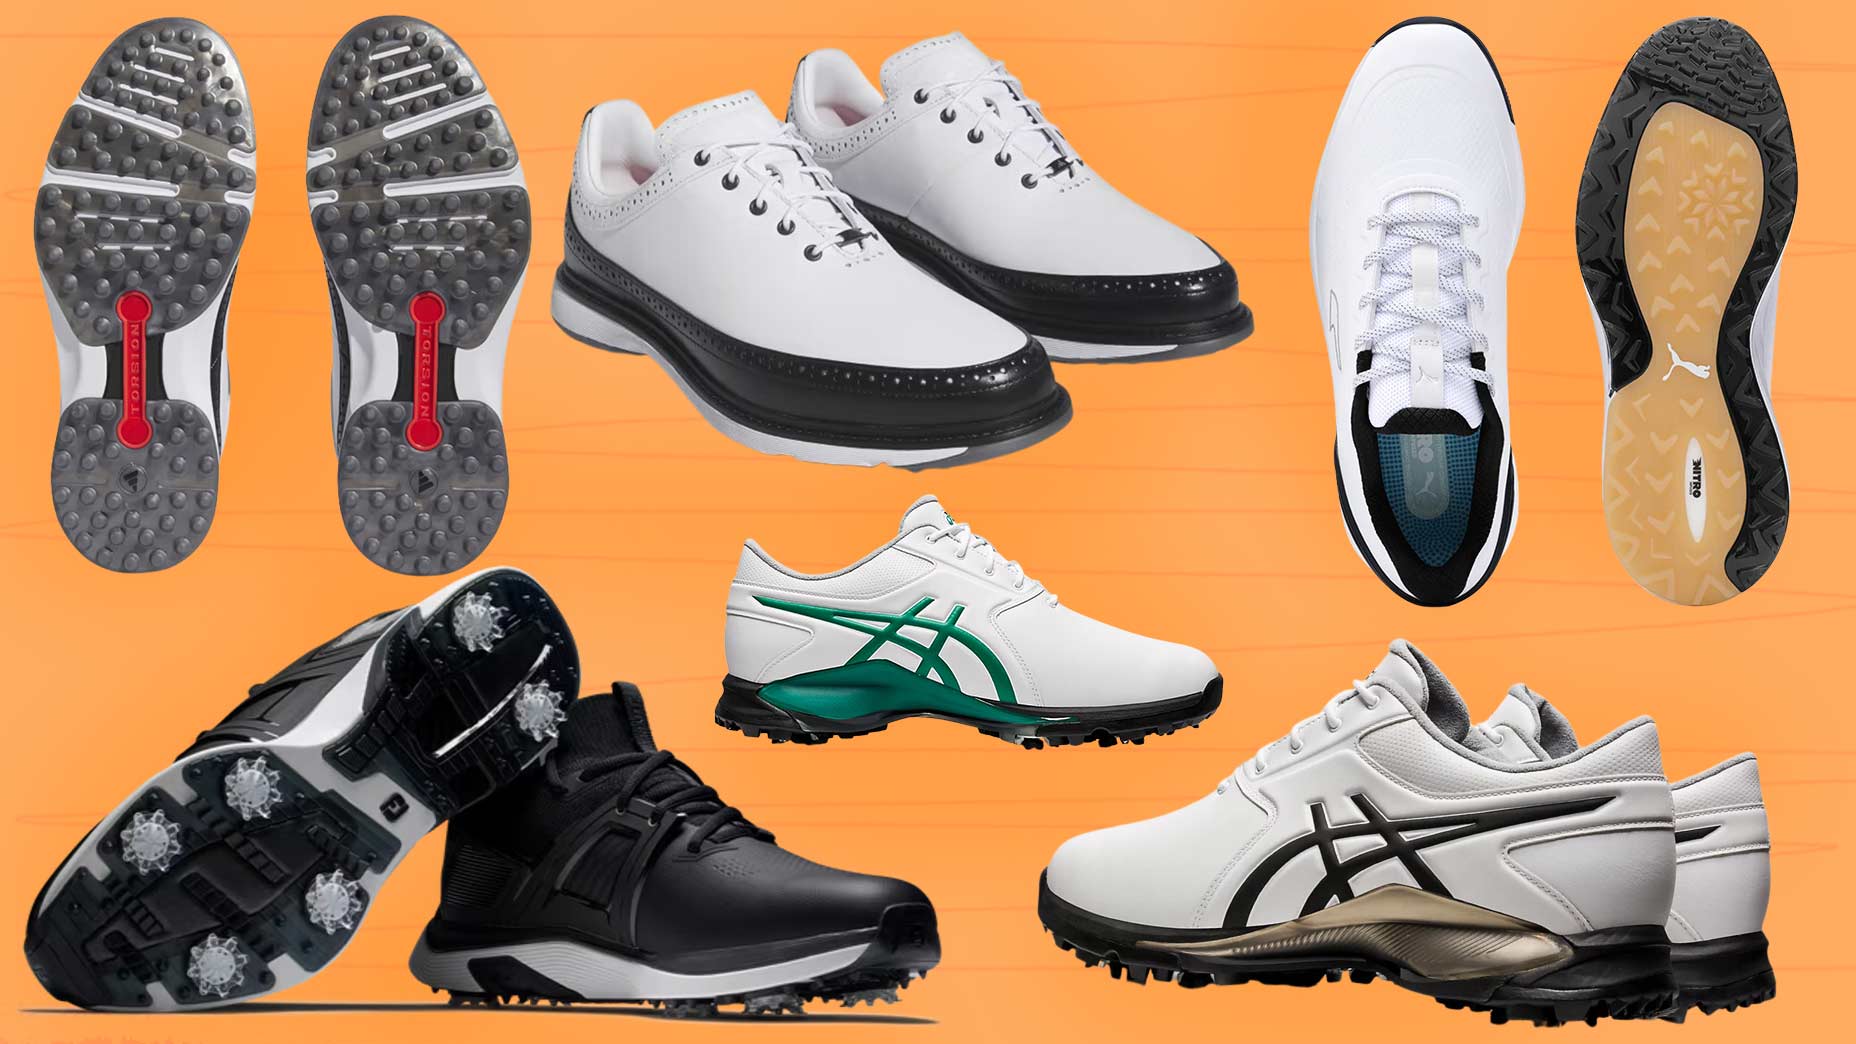 Share 149+ mens spiked golf shoes latest - kenmei.edu.vn